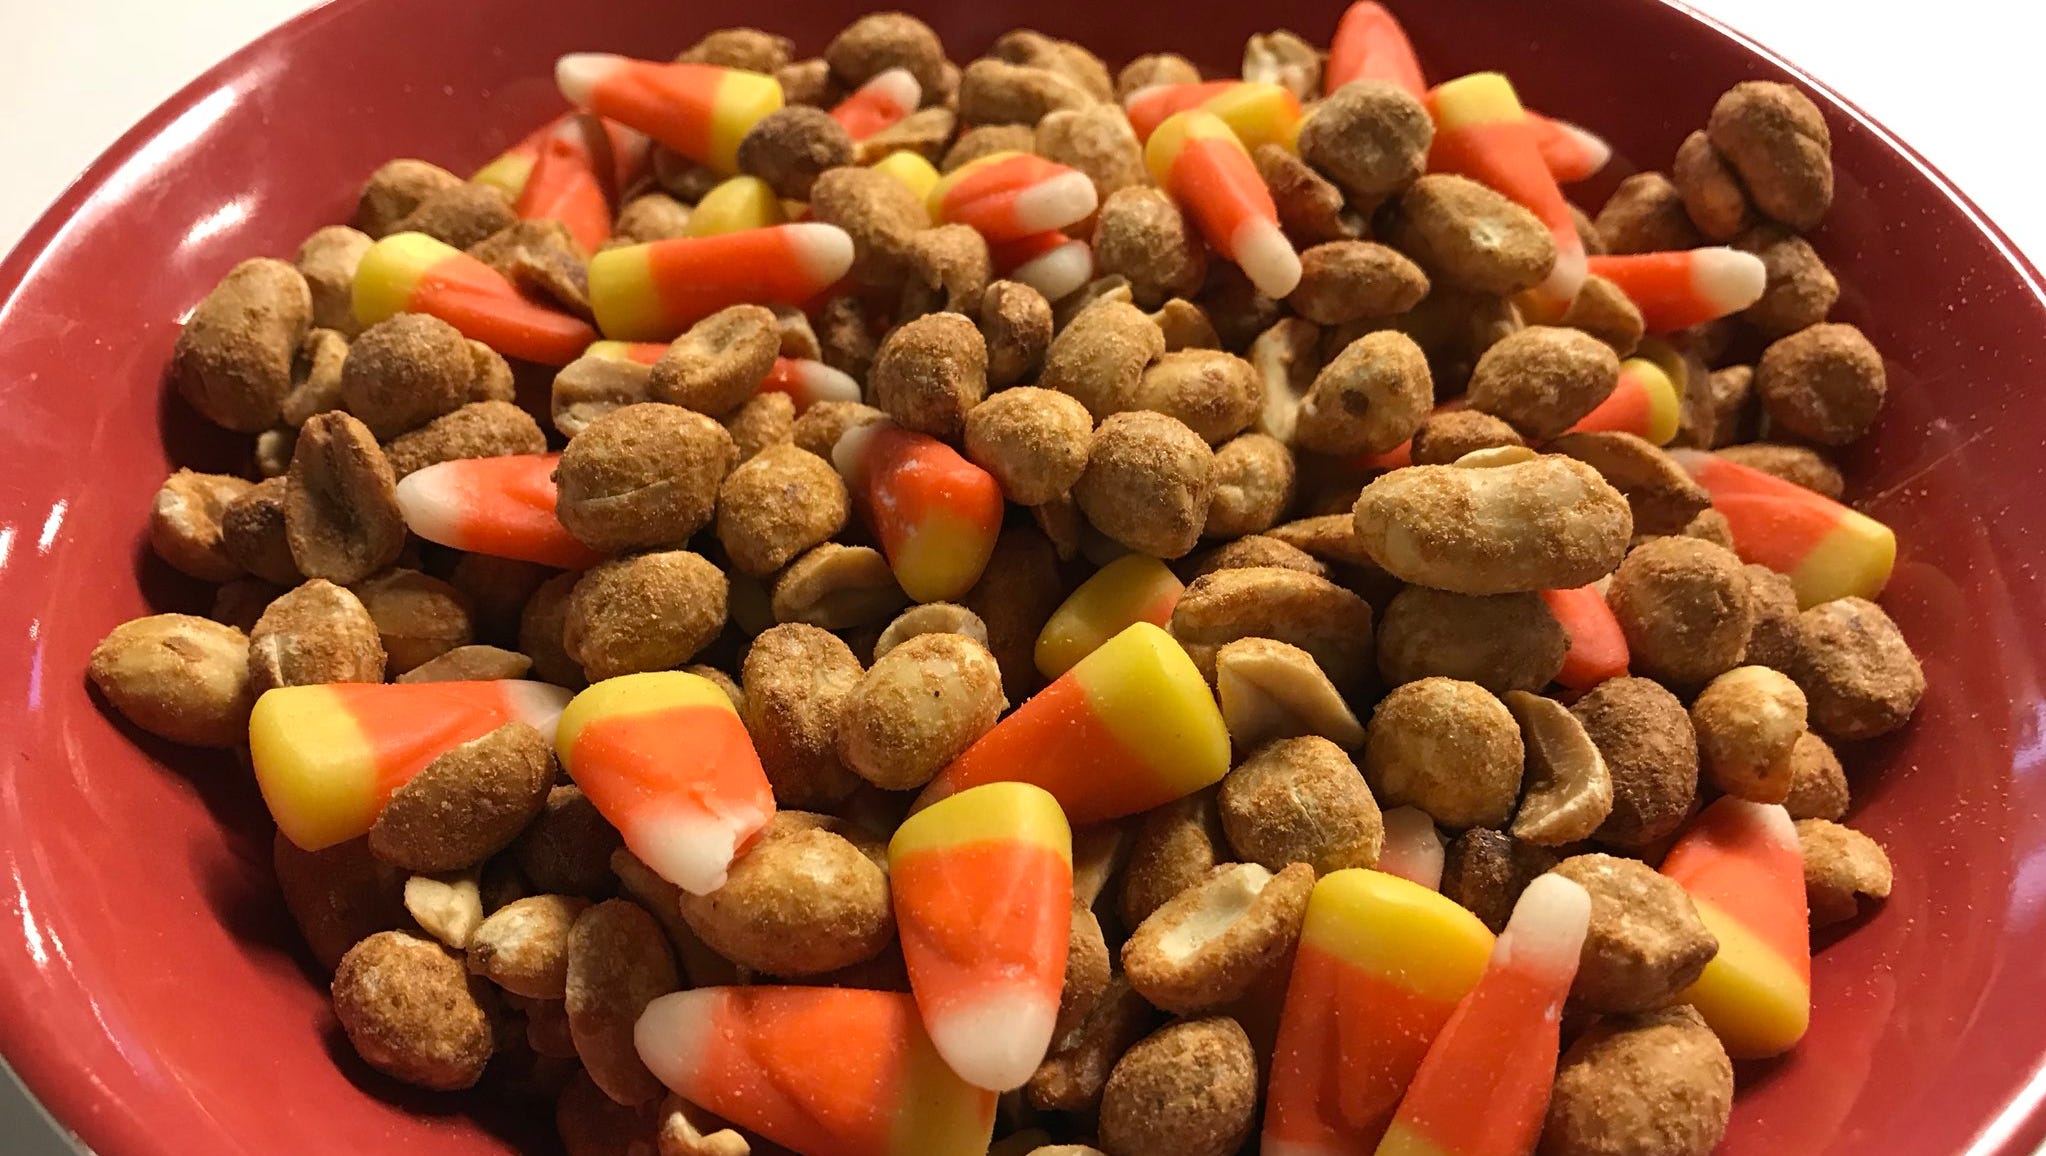 candy-corn-is-gross-but-one-ingredient-makes-it-taste-amazing